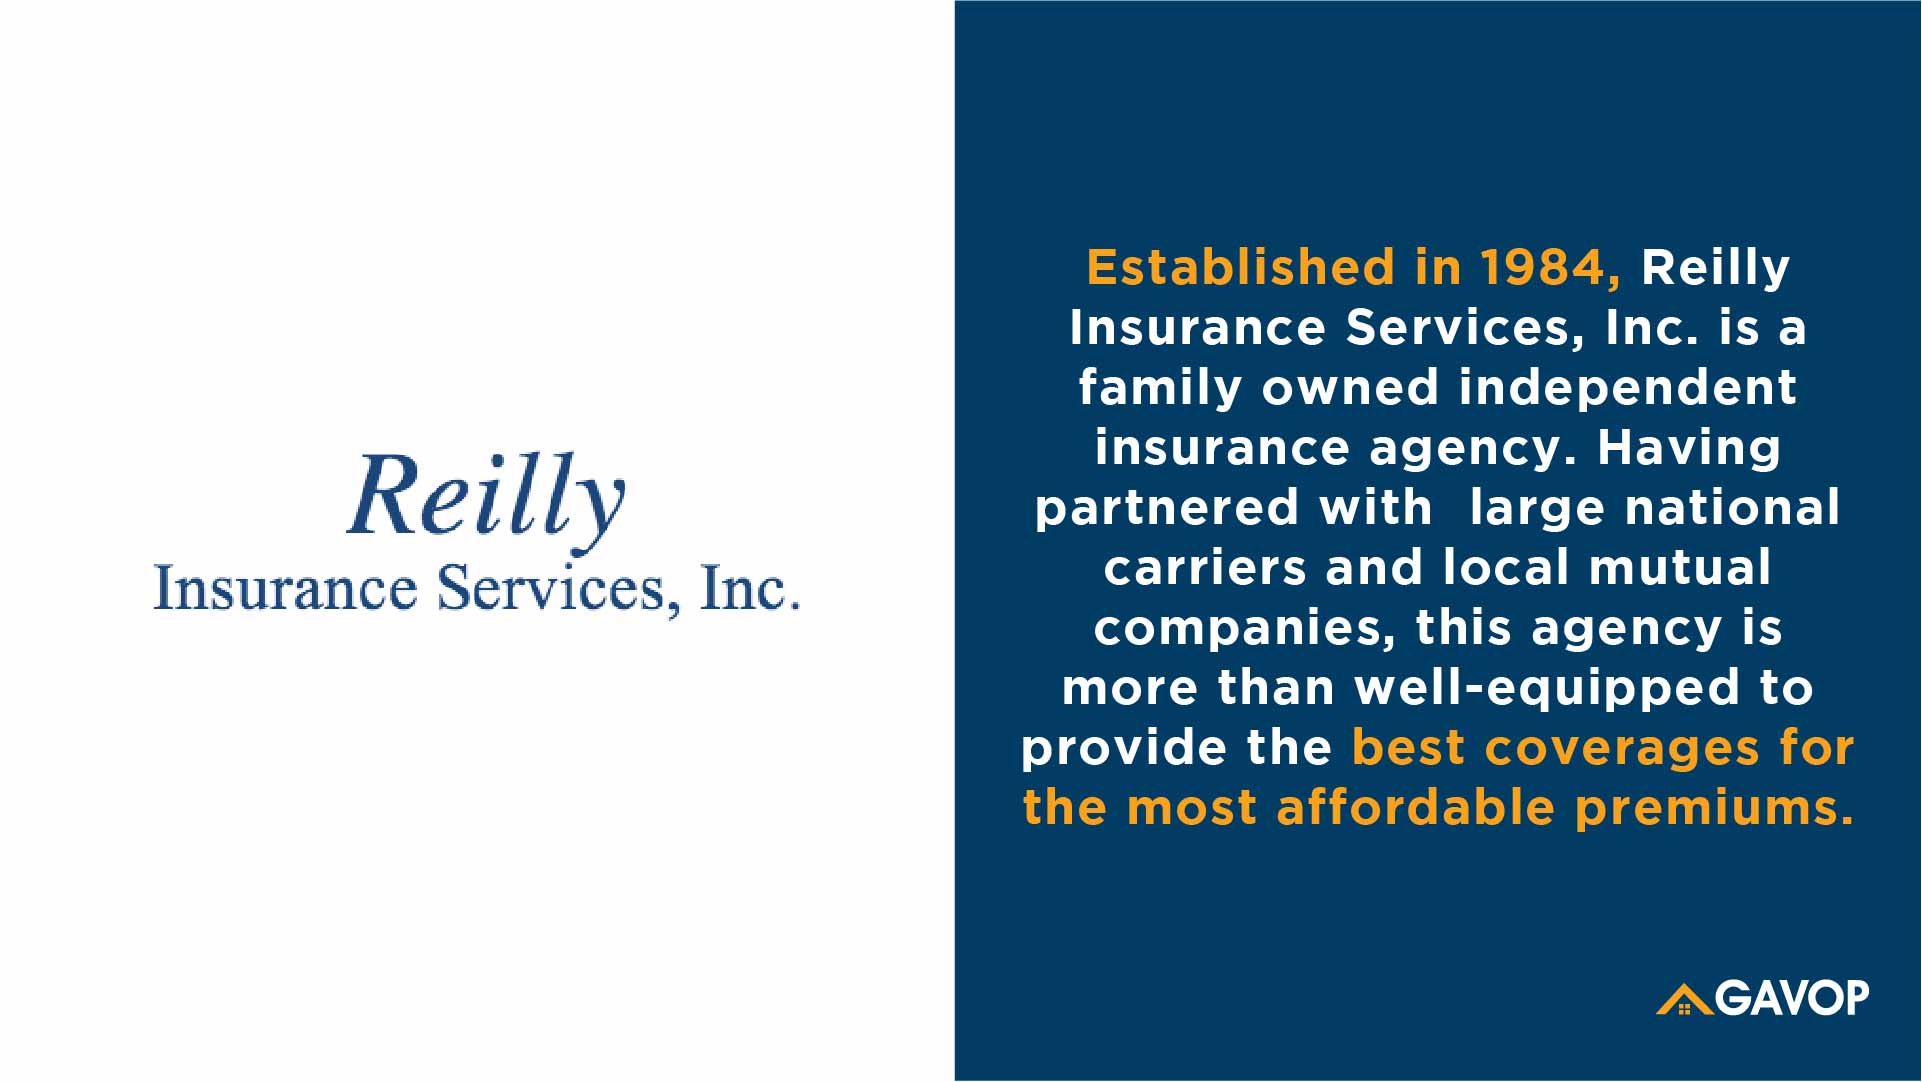 Reilly Insurance Services, Inc